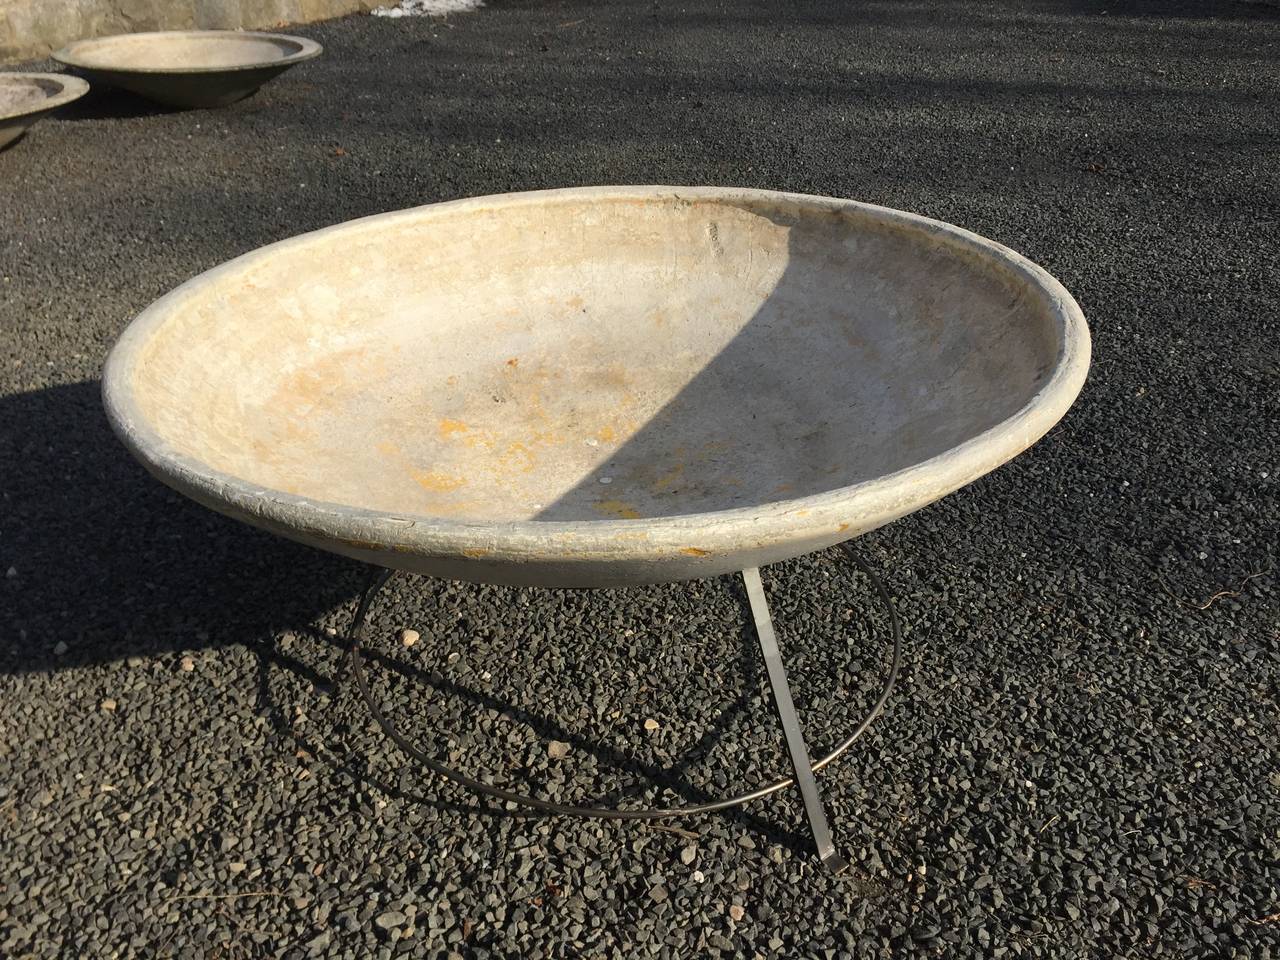 This rare 4' diameter beauty was designed by Willy Guhl for Eternit and dates to the 1960s. In fabulous original surface and perfect condition, it has a steel stand that dates to the period, but may not be original. The planter is magnificent potted